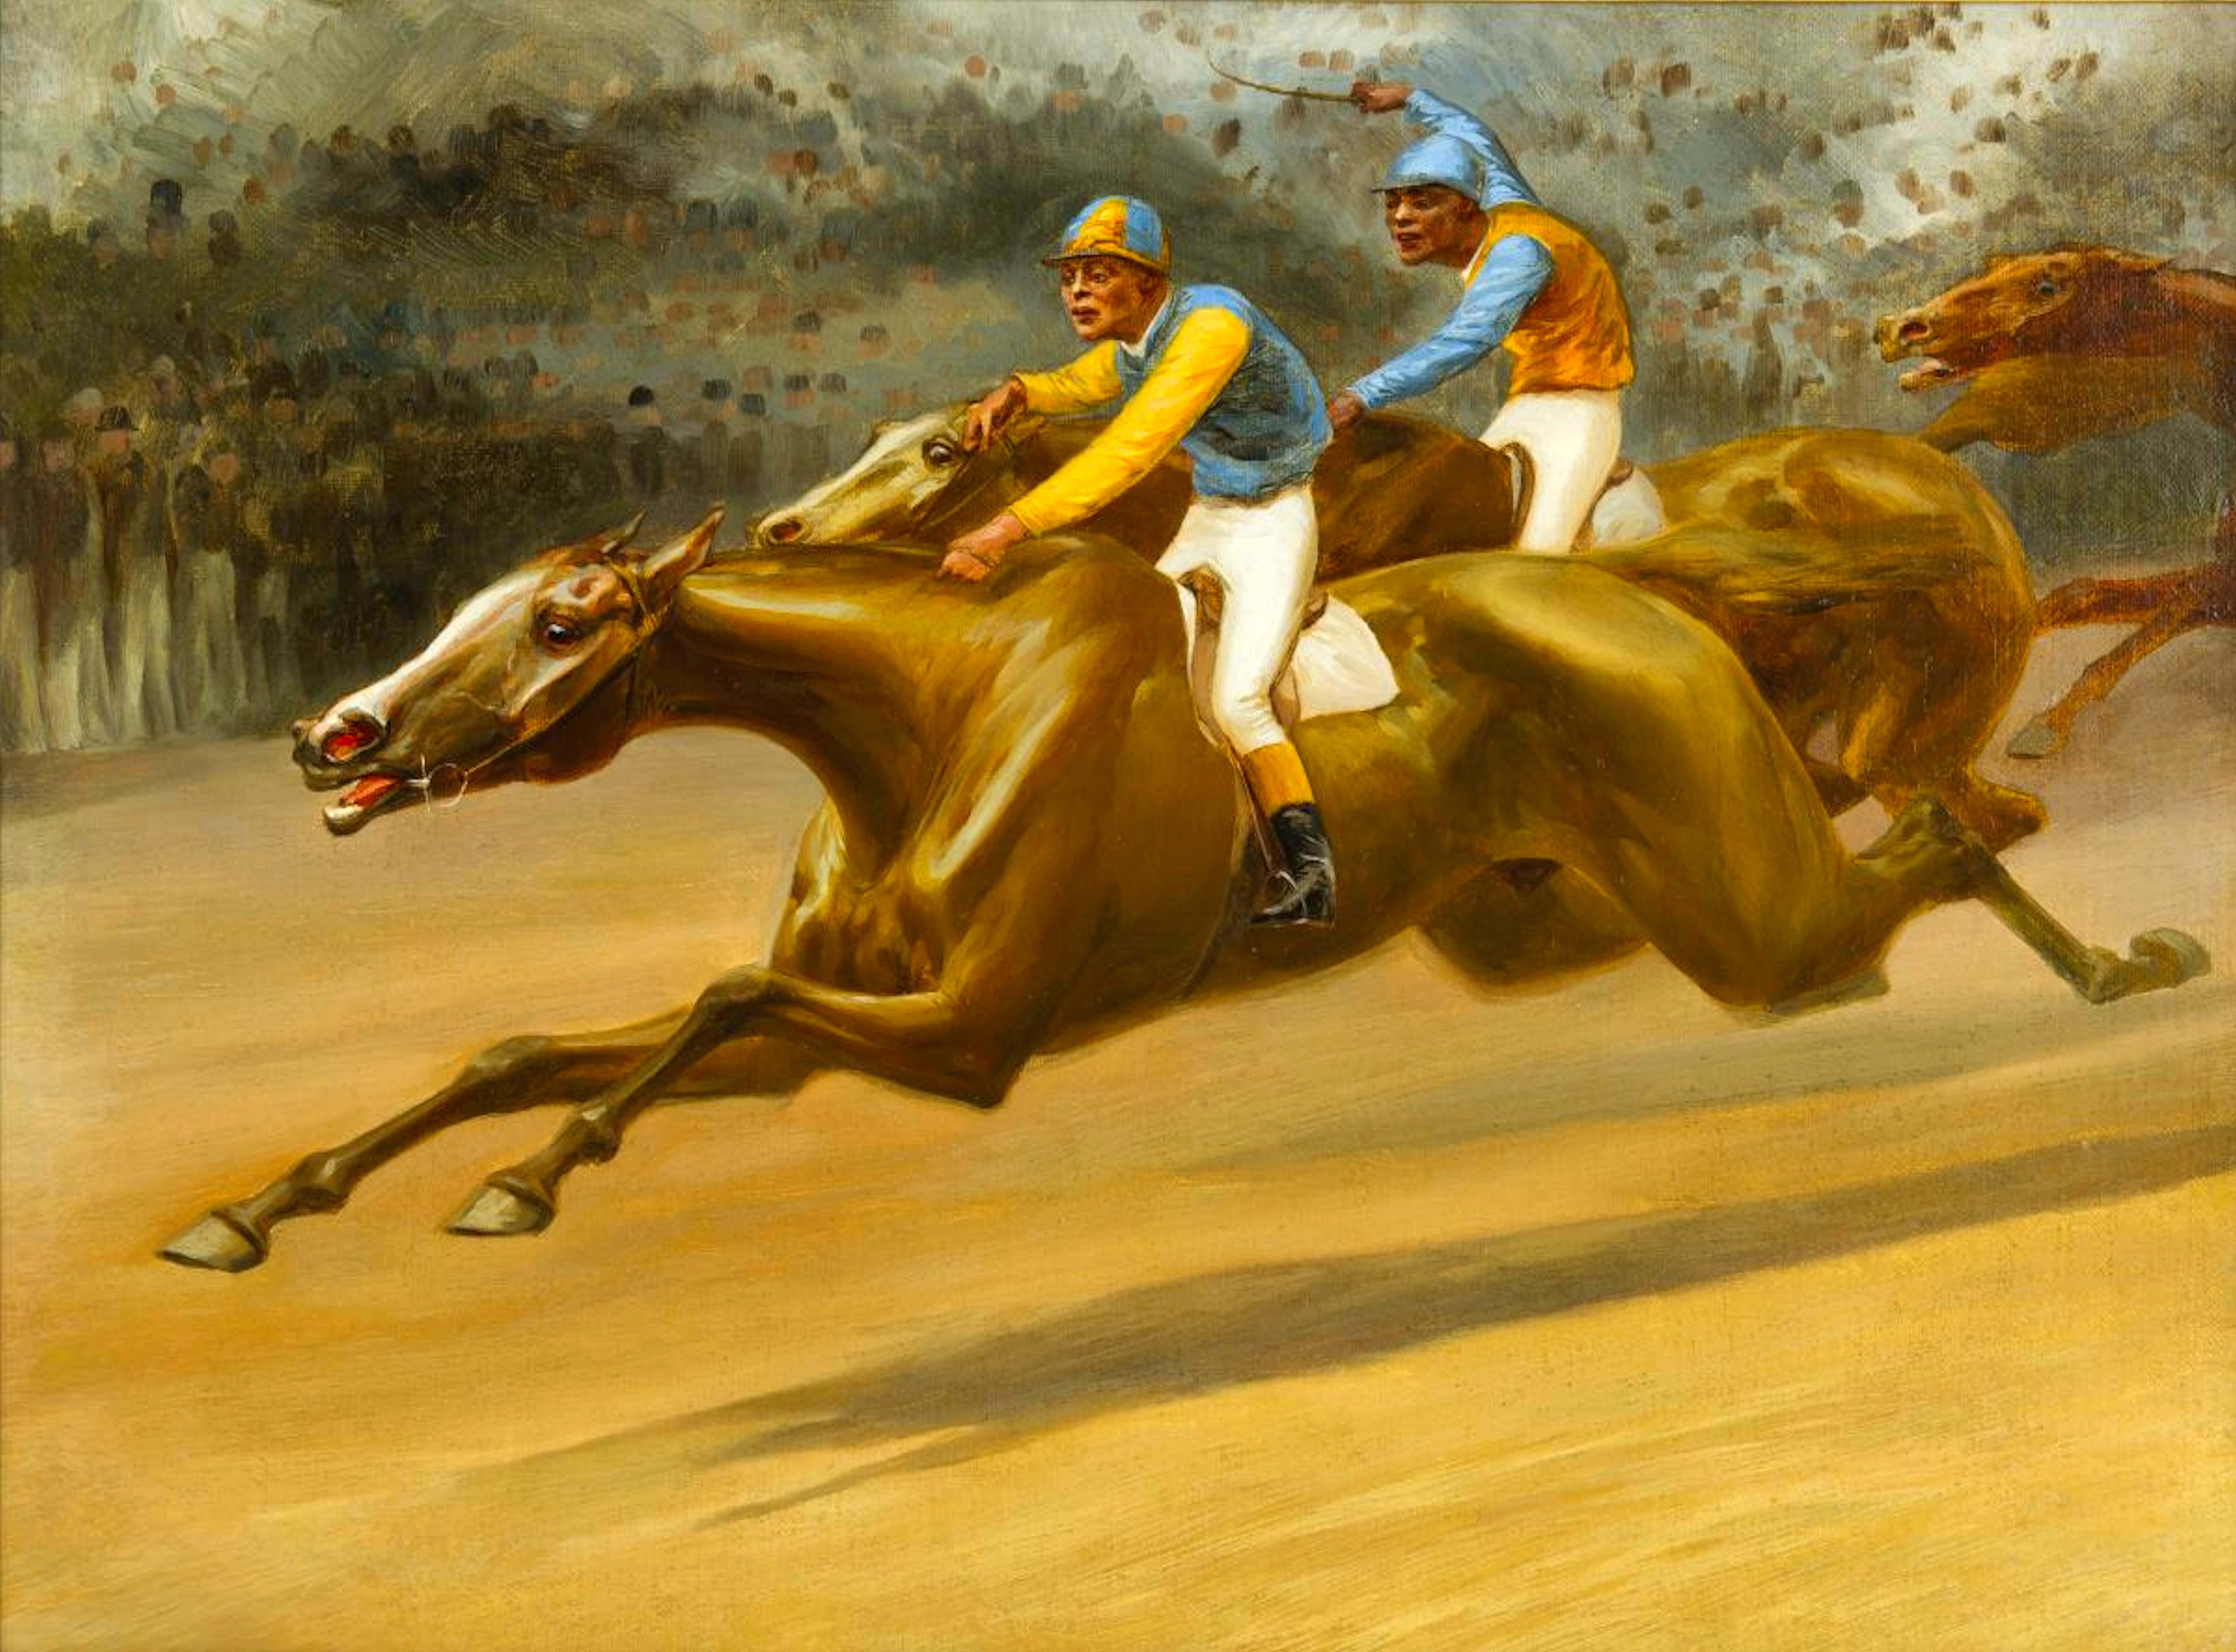 Proctor Knott (The First Futurity, 1888, Jerome Park, Sheepshead Bay, a Close Finish), by Louis Maurer: Proctor Knott with Shelby "Pike" Barnes in front winning the race (National Sporting Library and Museum)